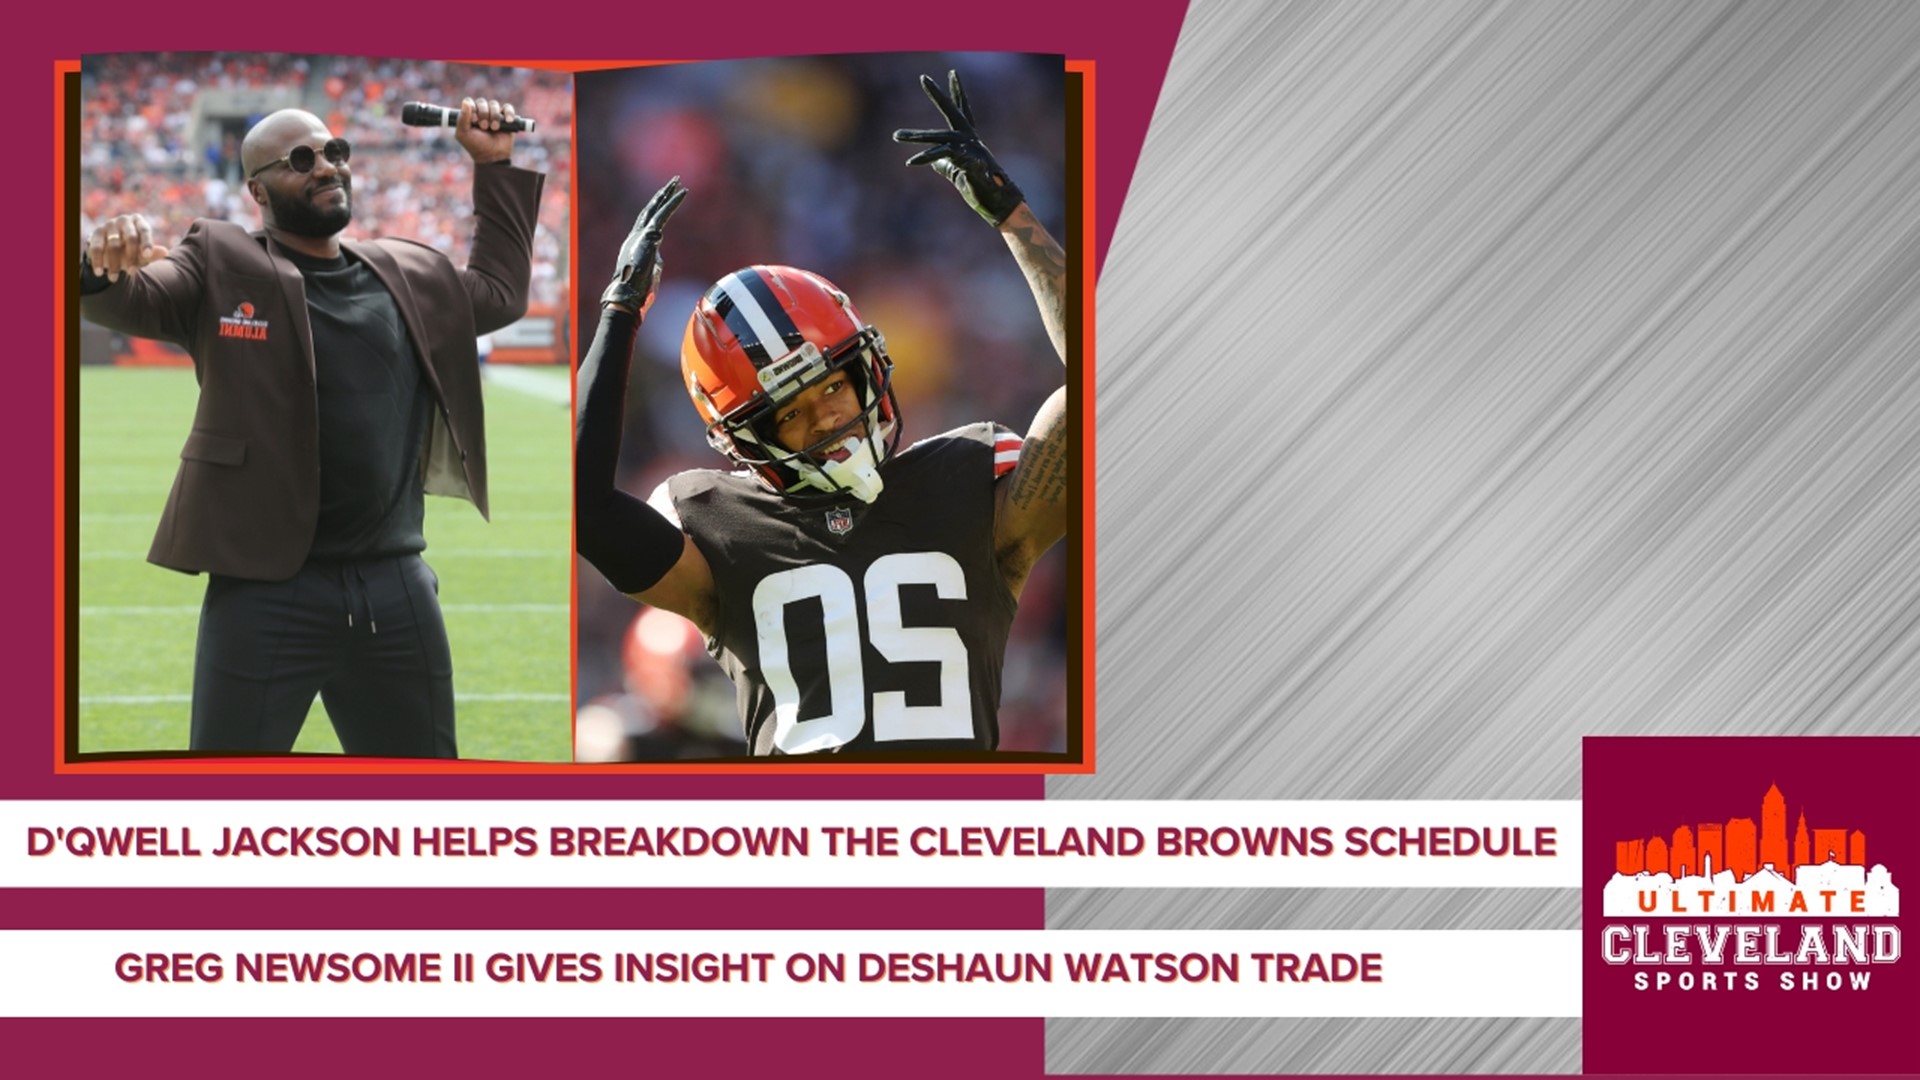 The UCSS crew breaks down the Cleveland Browns schedule with Browns legend D'Qwell Jackson. Greg Newsome II speaks on Deshaun Watson's trade and his exclusive shoes.